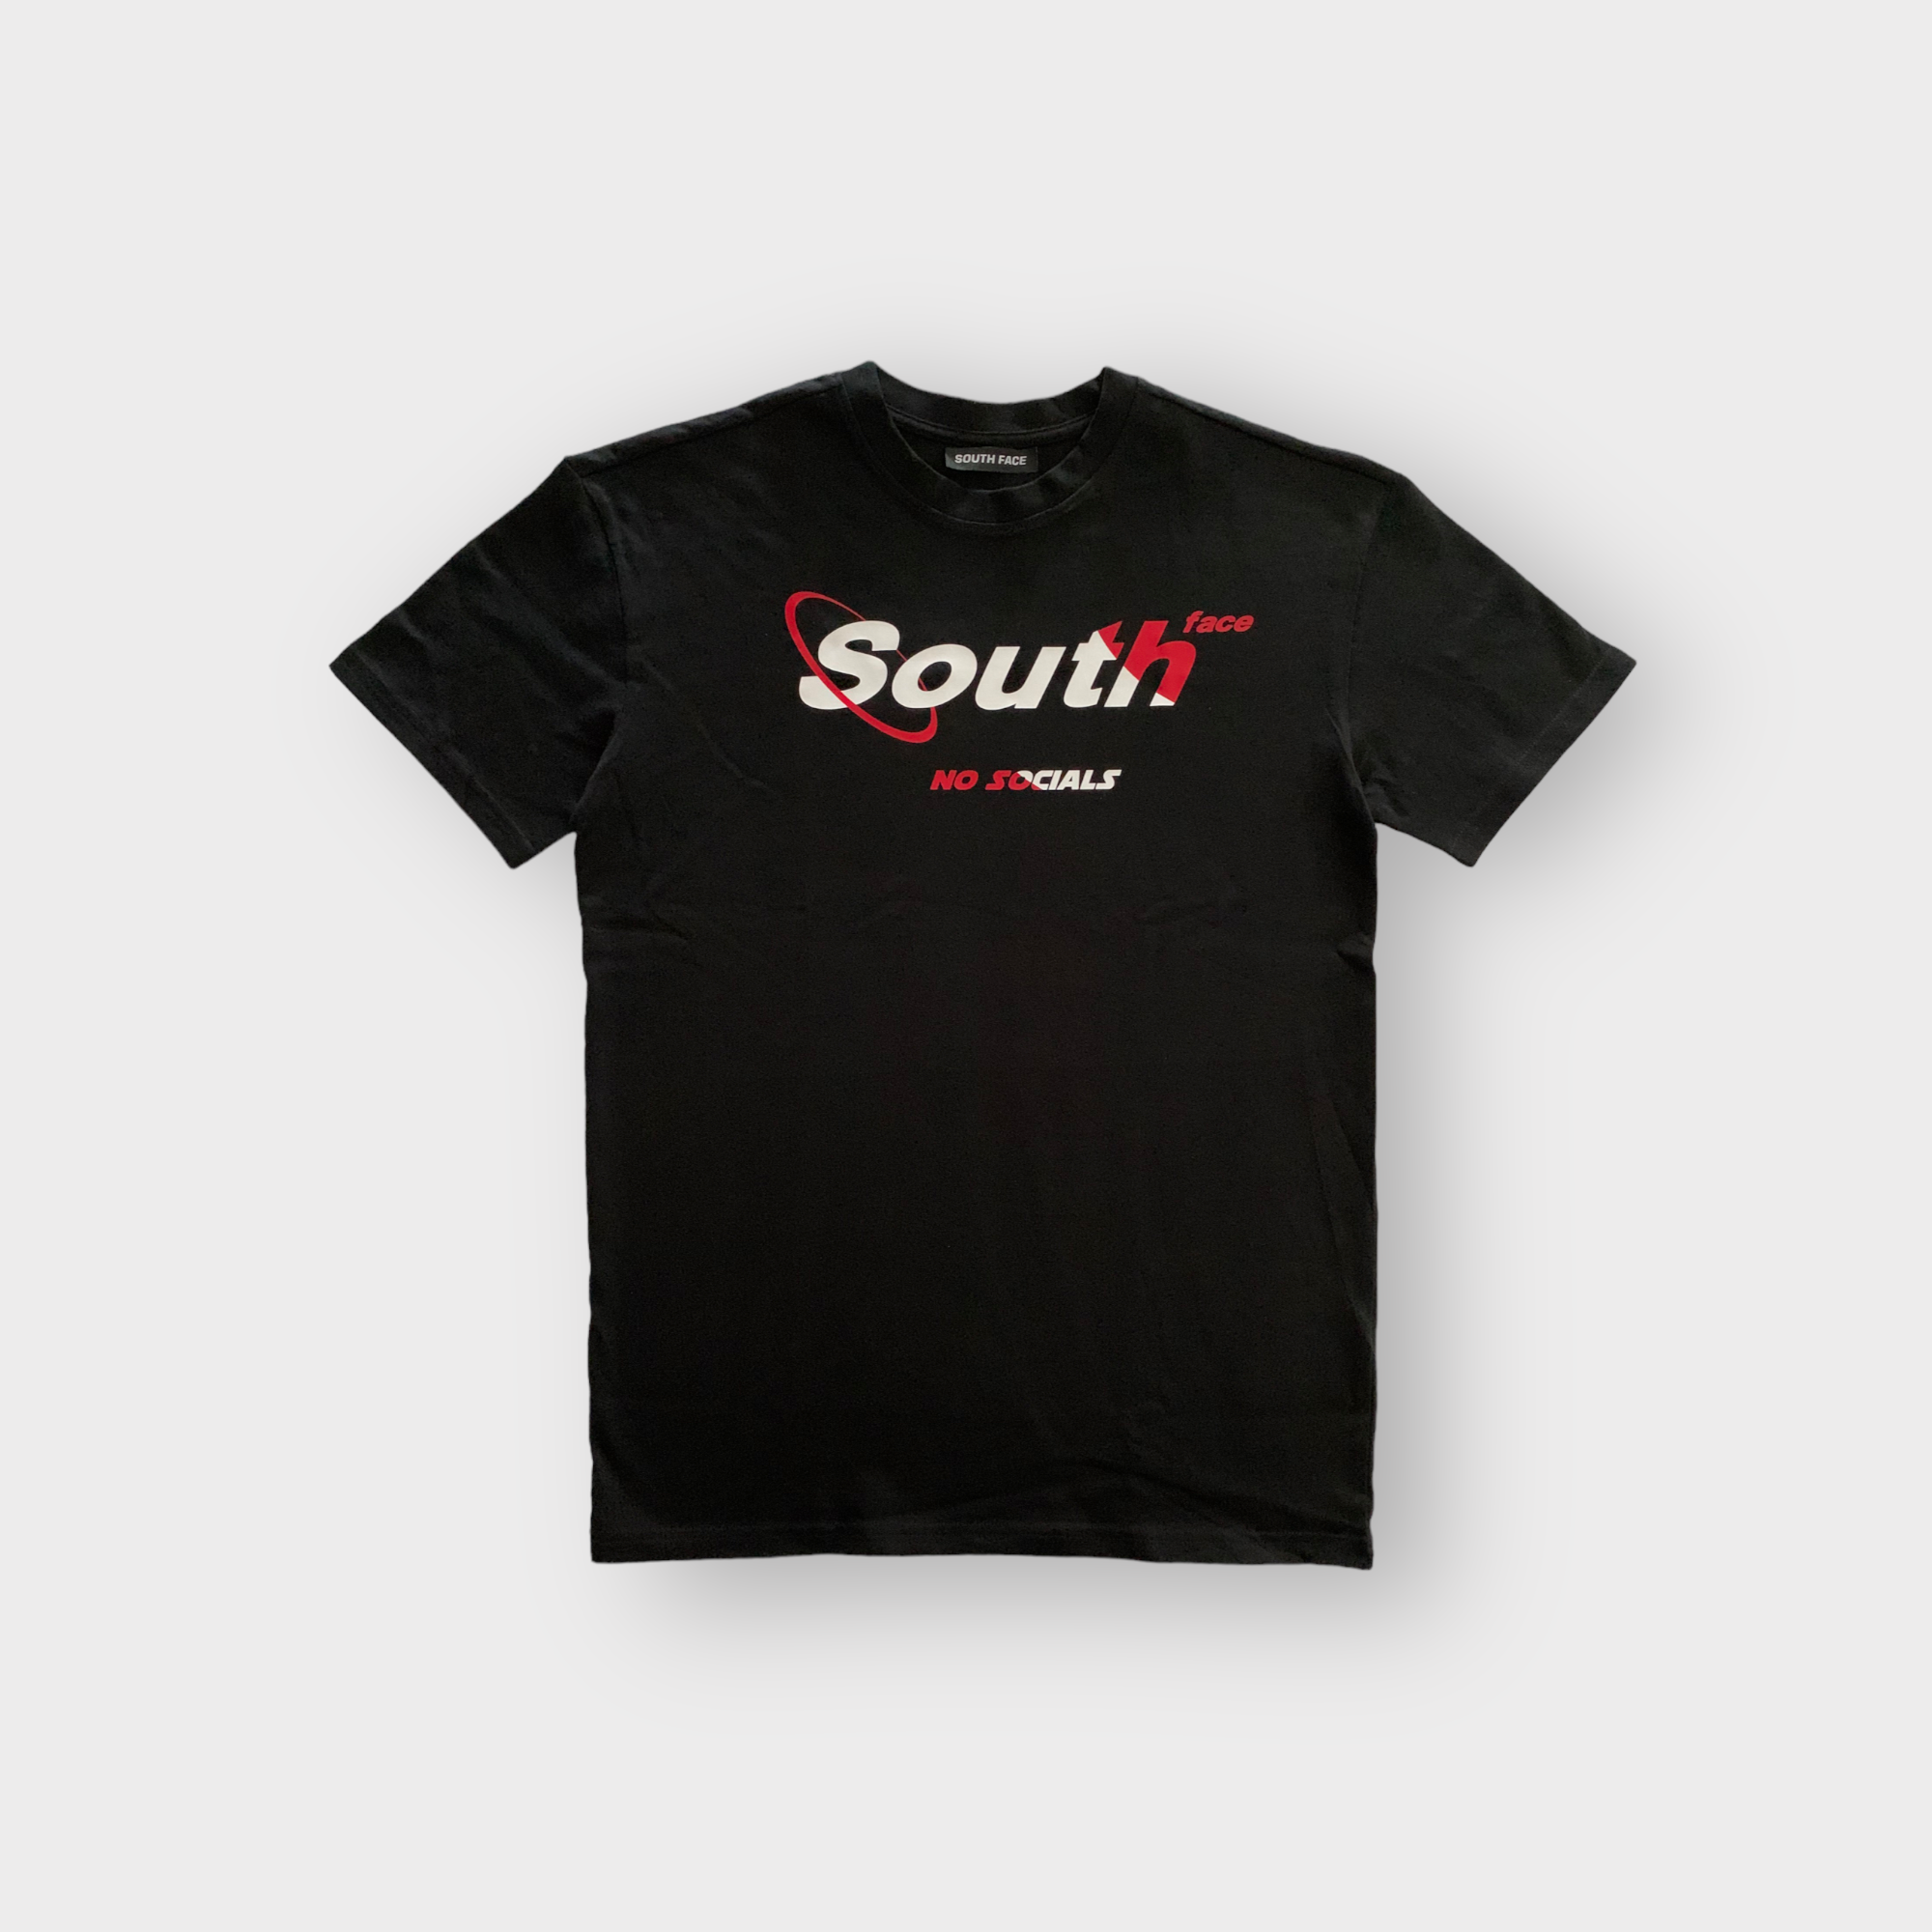 All Clothing – South Face Clothing